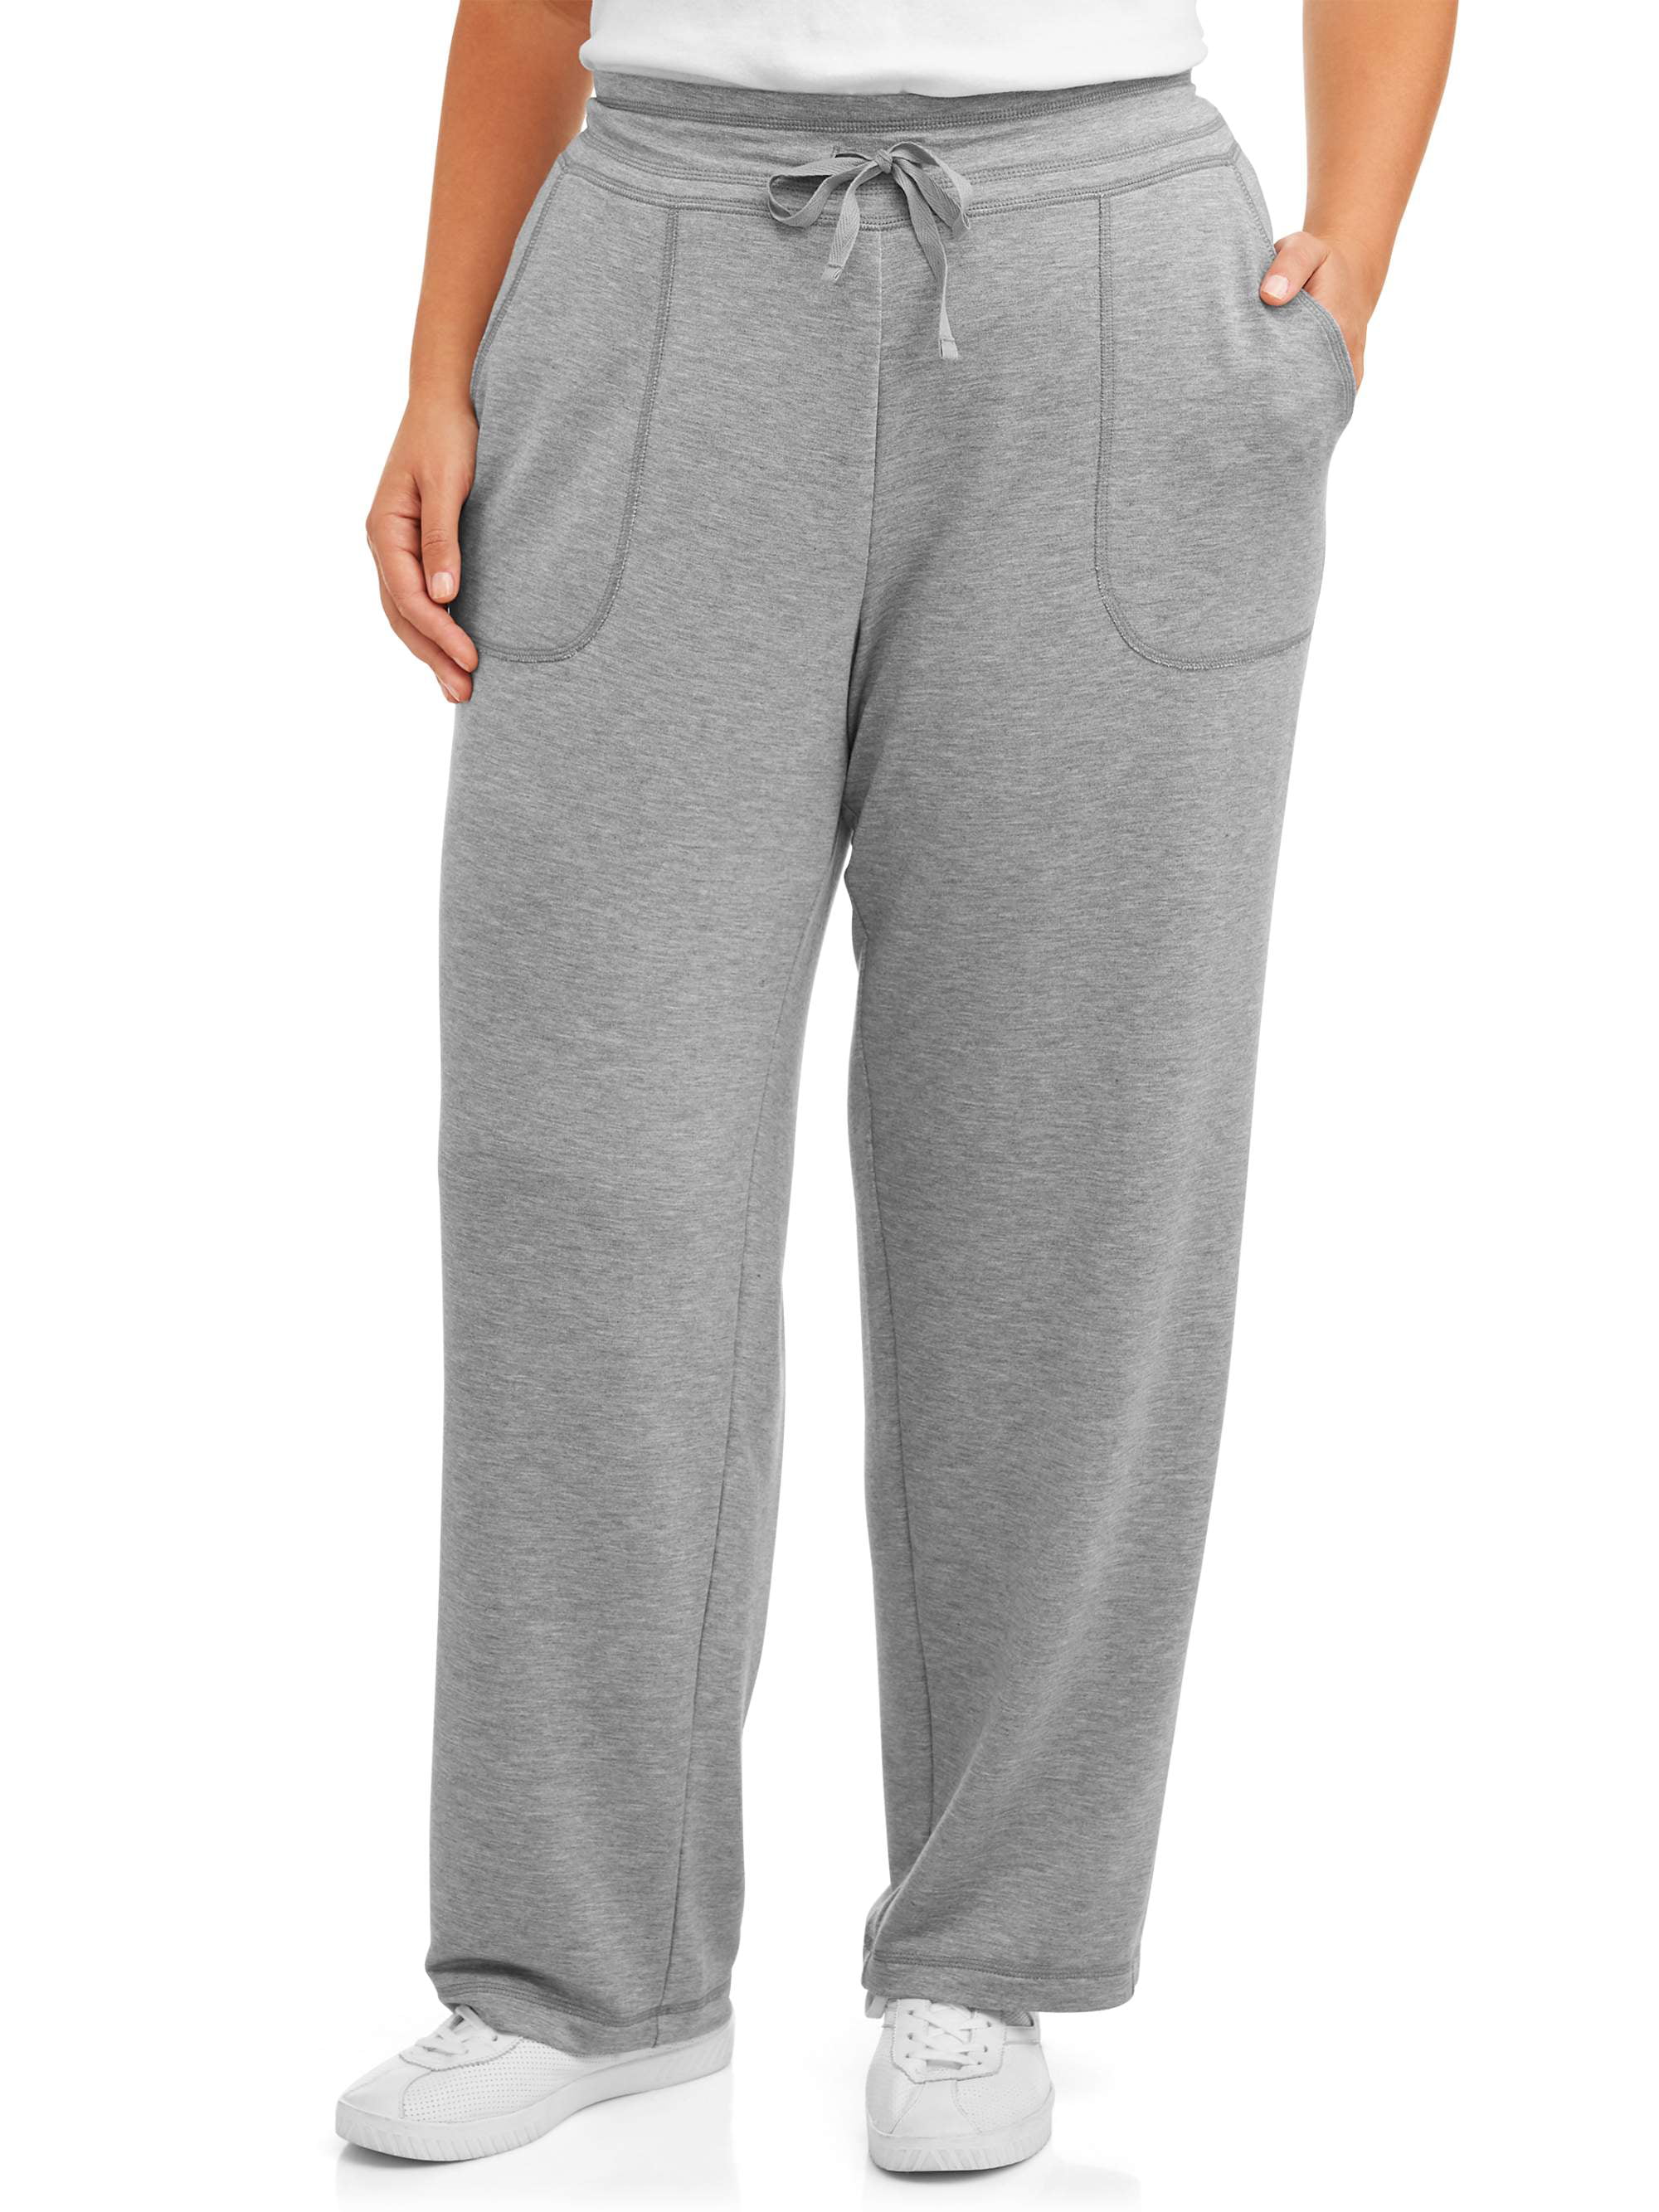 Athletic Works Women's Plus Size Active Relaxed Fit Sweatpants ...